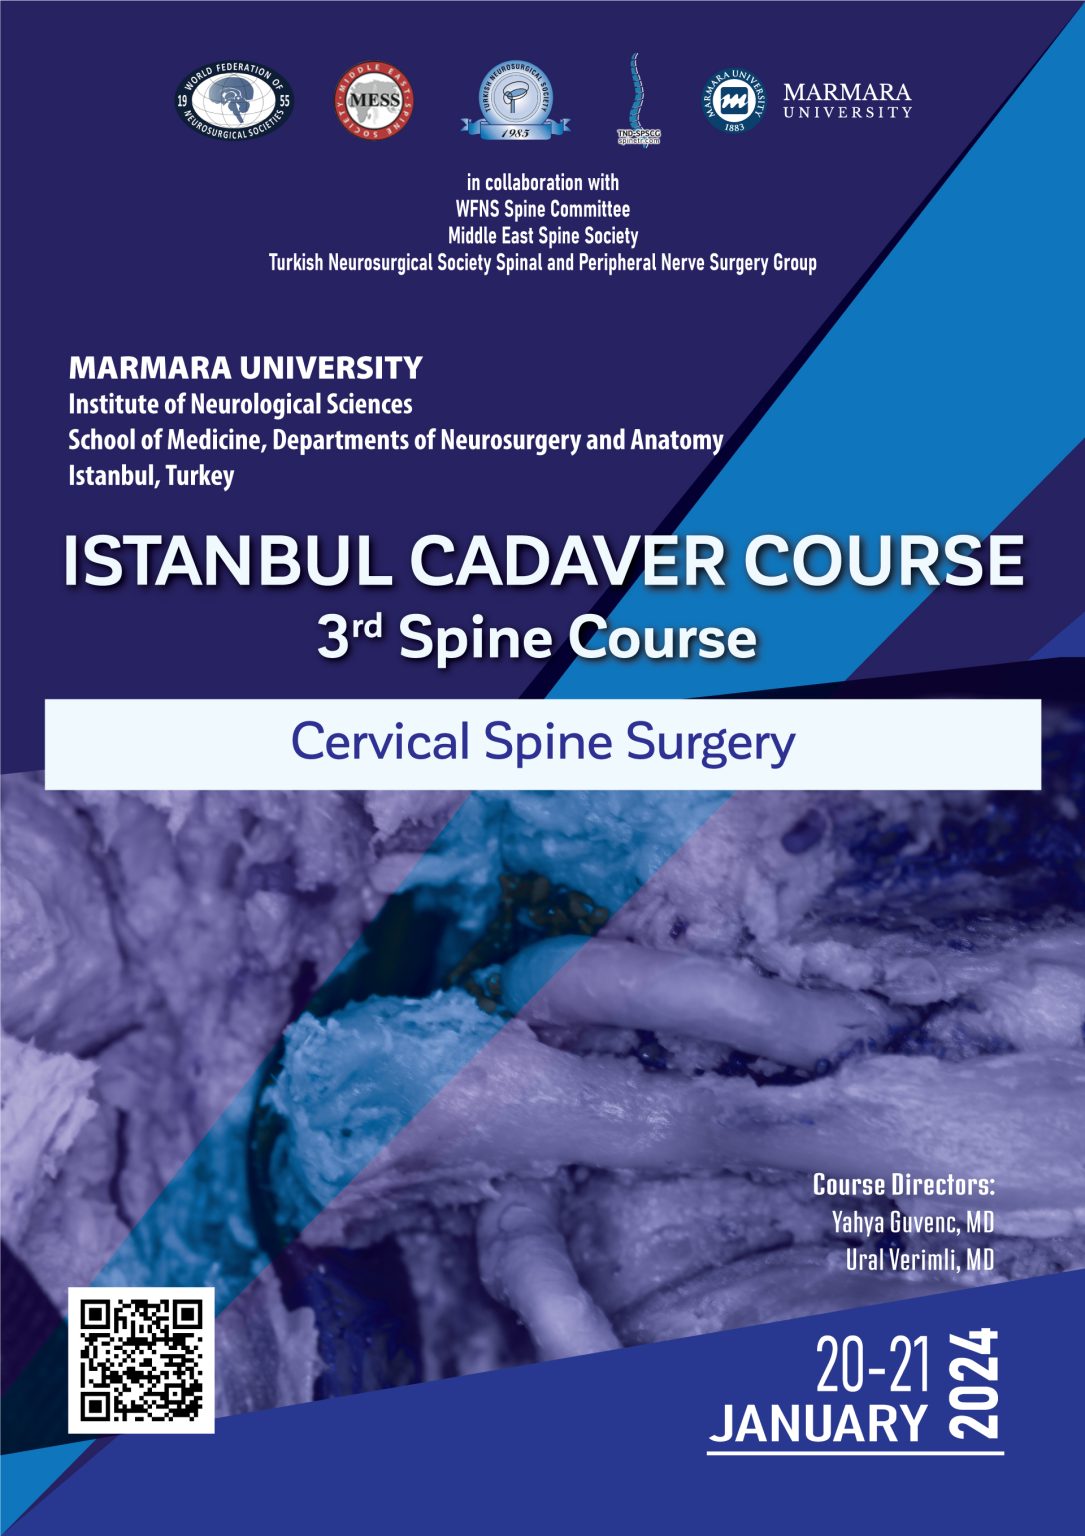 ISTANBUL CADAVER COURSE 3rd Spine Course / Cervical Spine Surgery